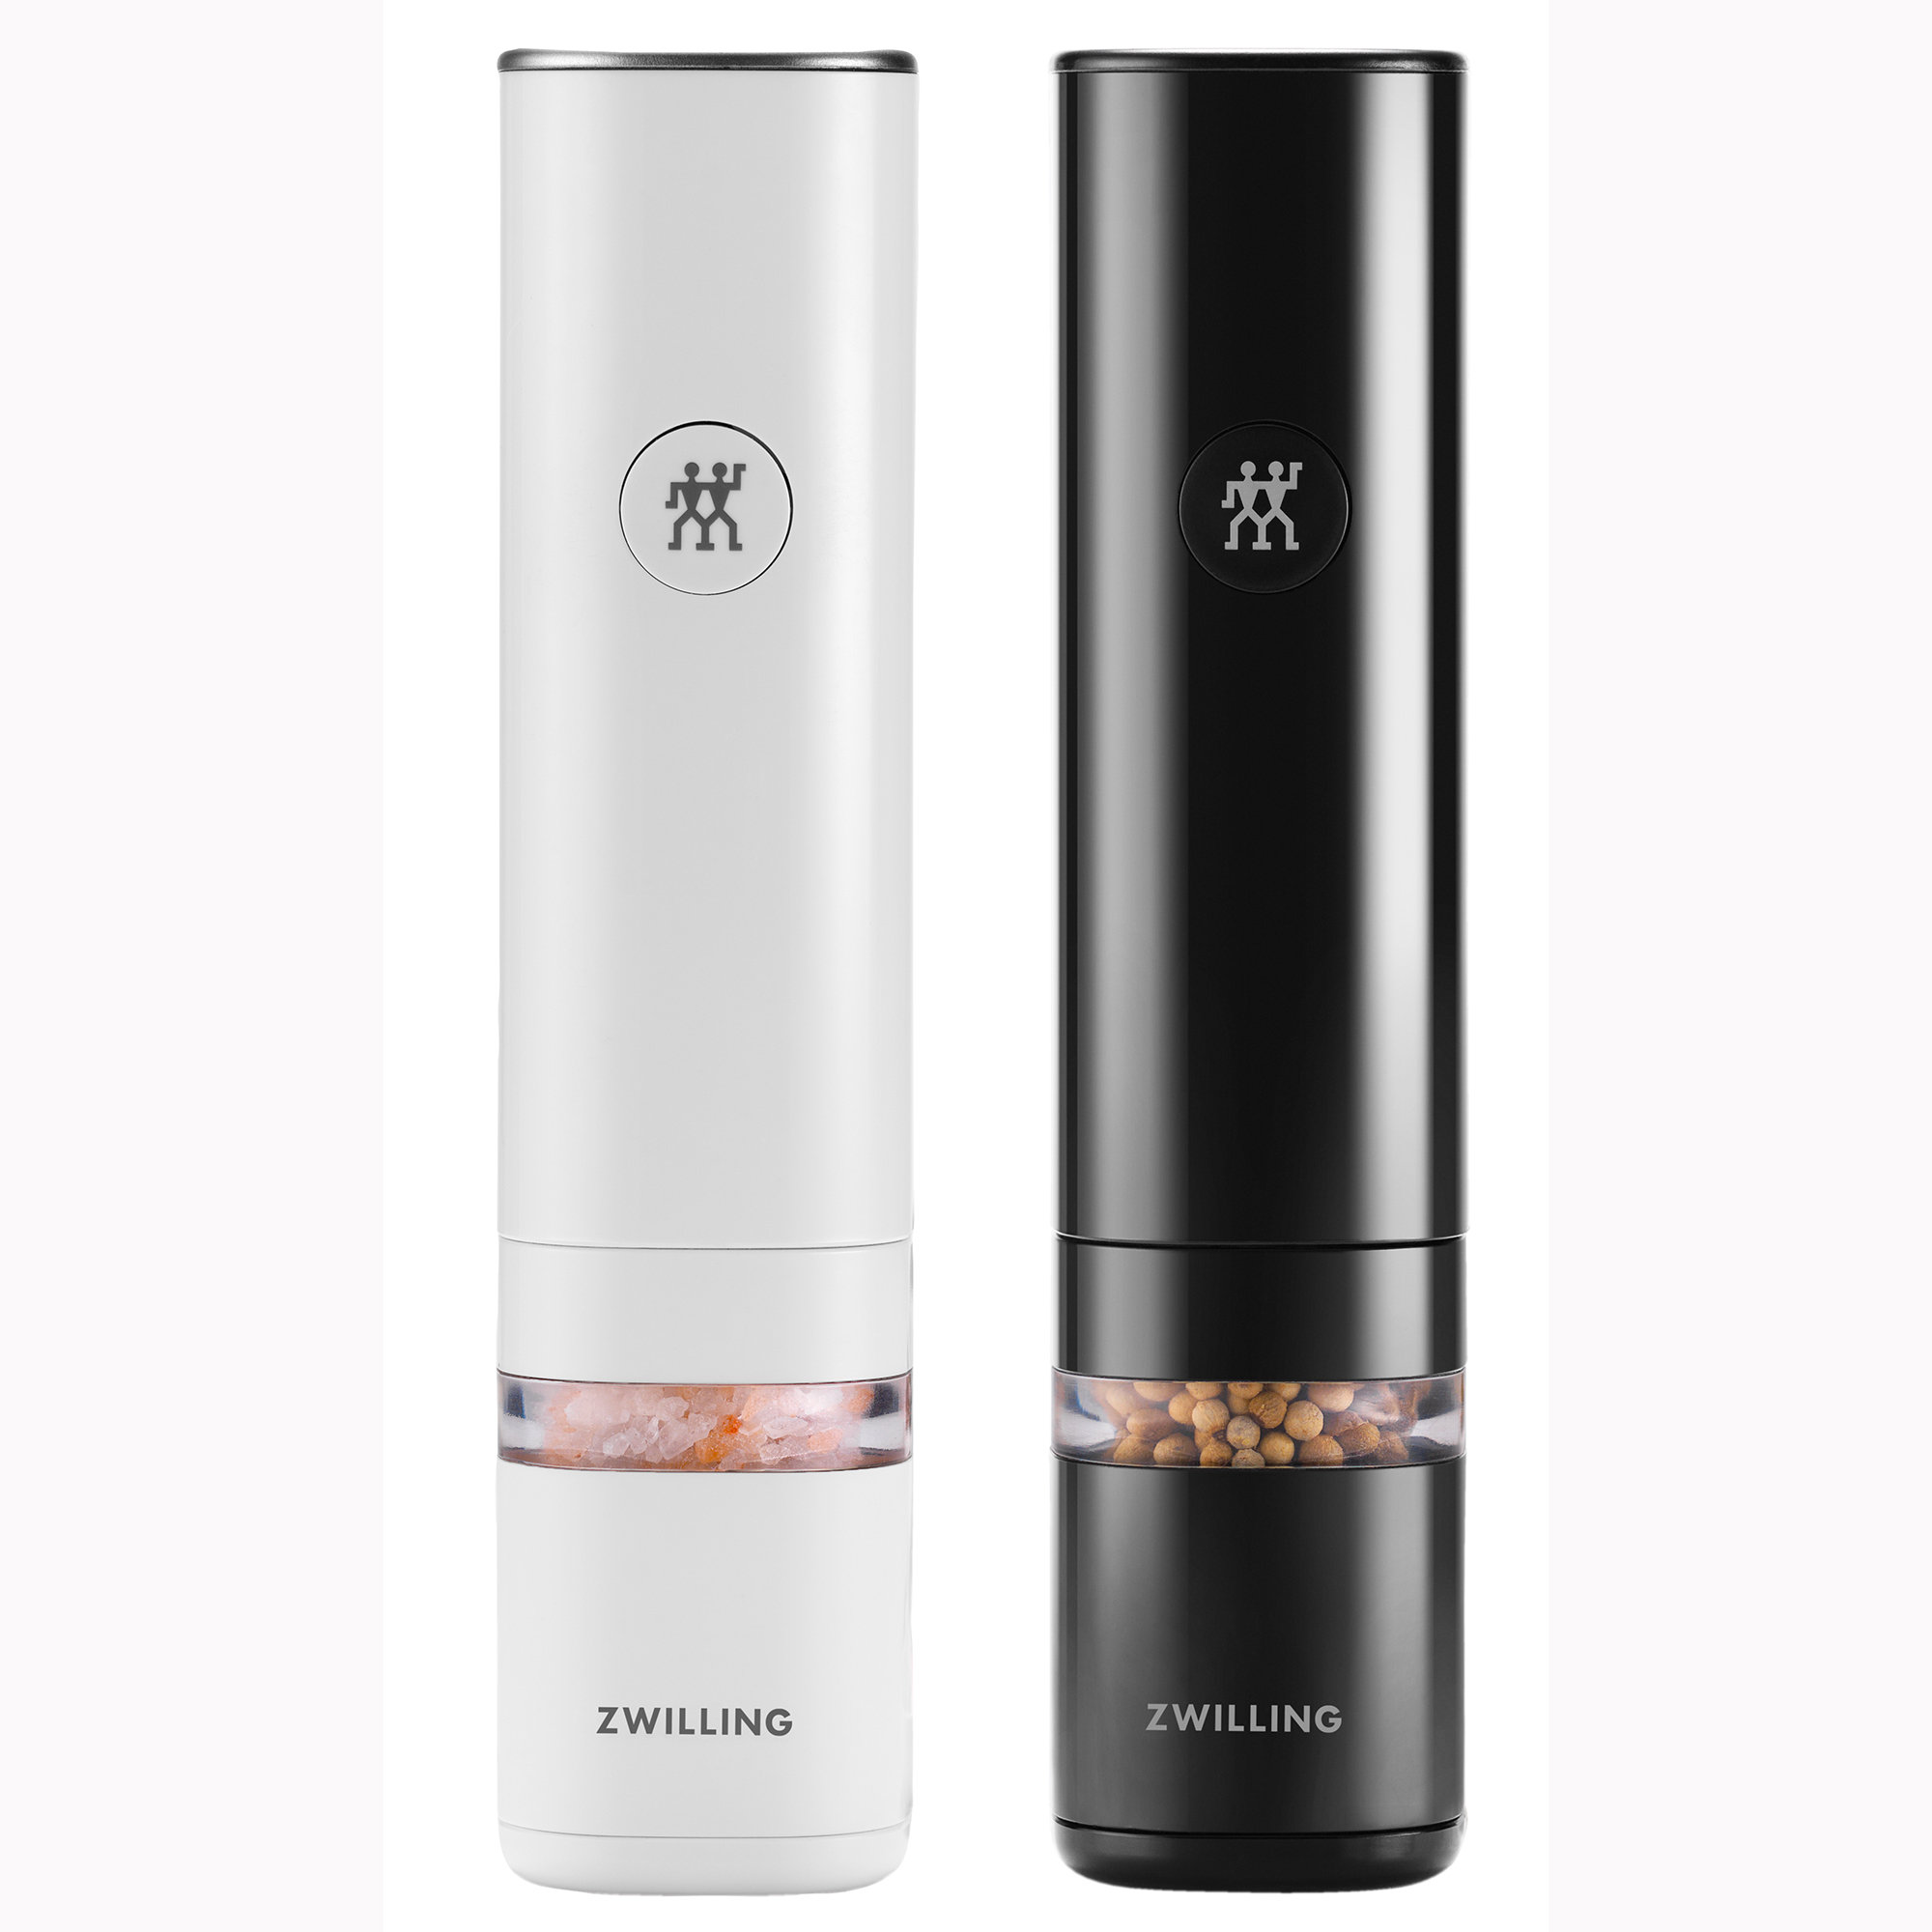 Electric Salt and Pepper Grinder Set, 2 Mills, Rechargeable, with Charging Base, Power Adapter, Size: Large, Silver